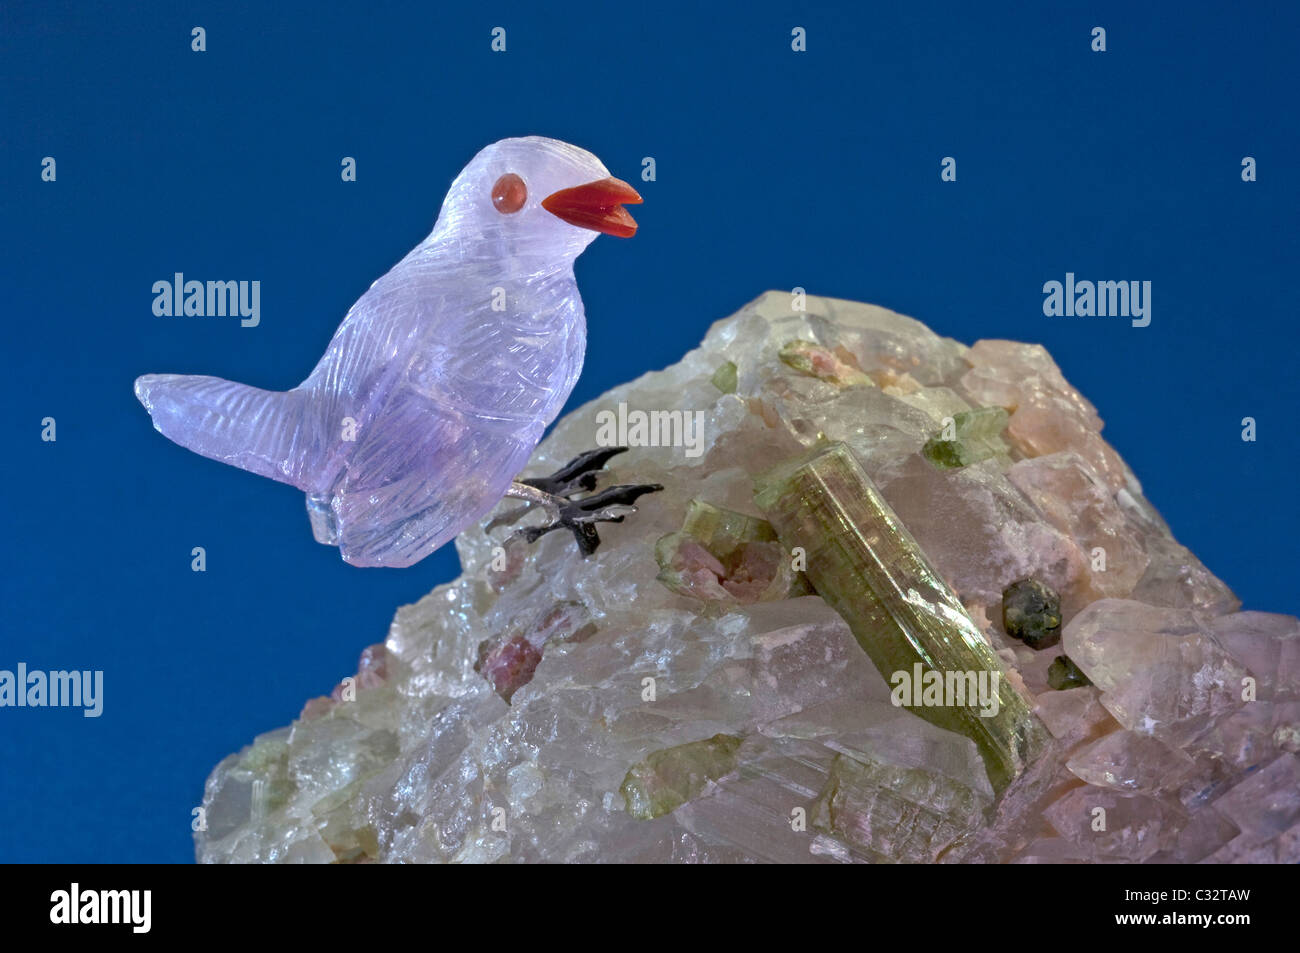 Sparrow made of Amethyst standing on a crystal with tourmaline. Studio picture against a blue background. Stock Photo